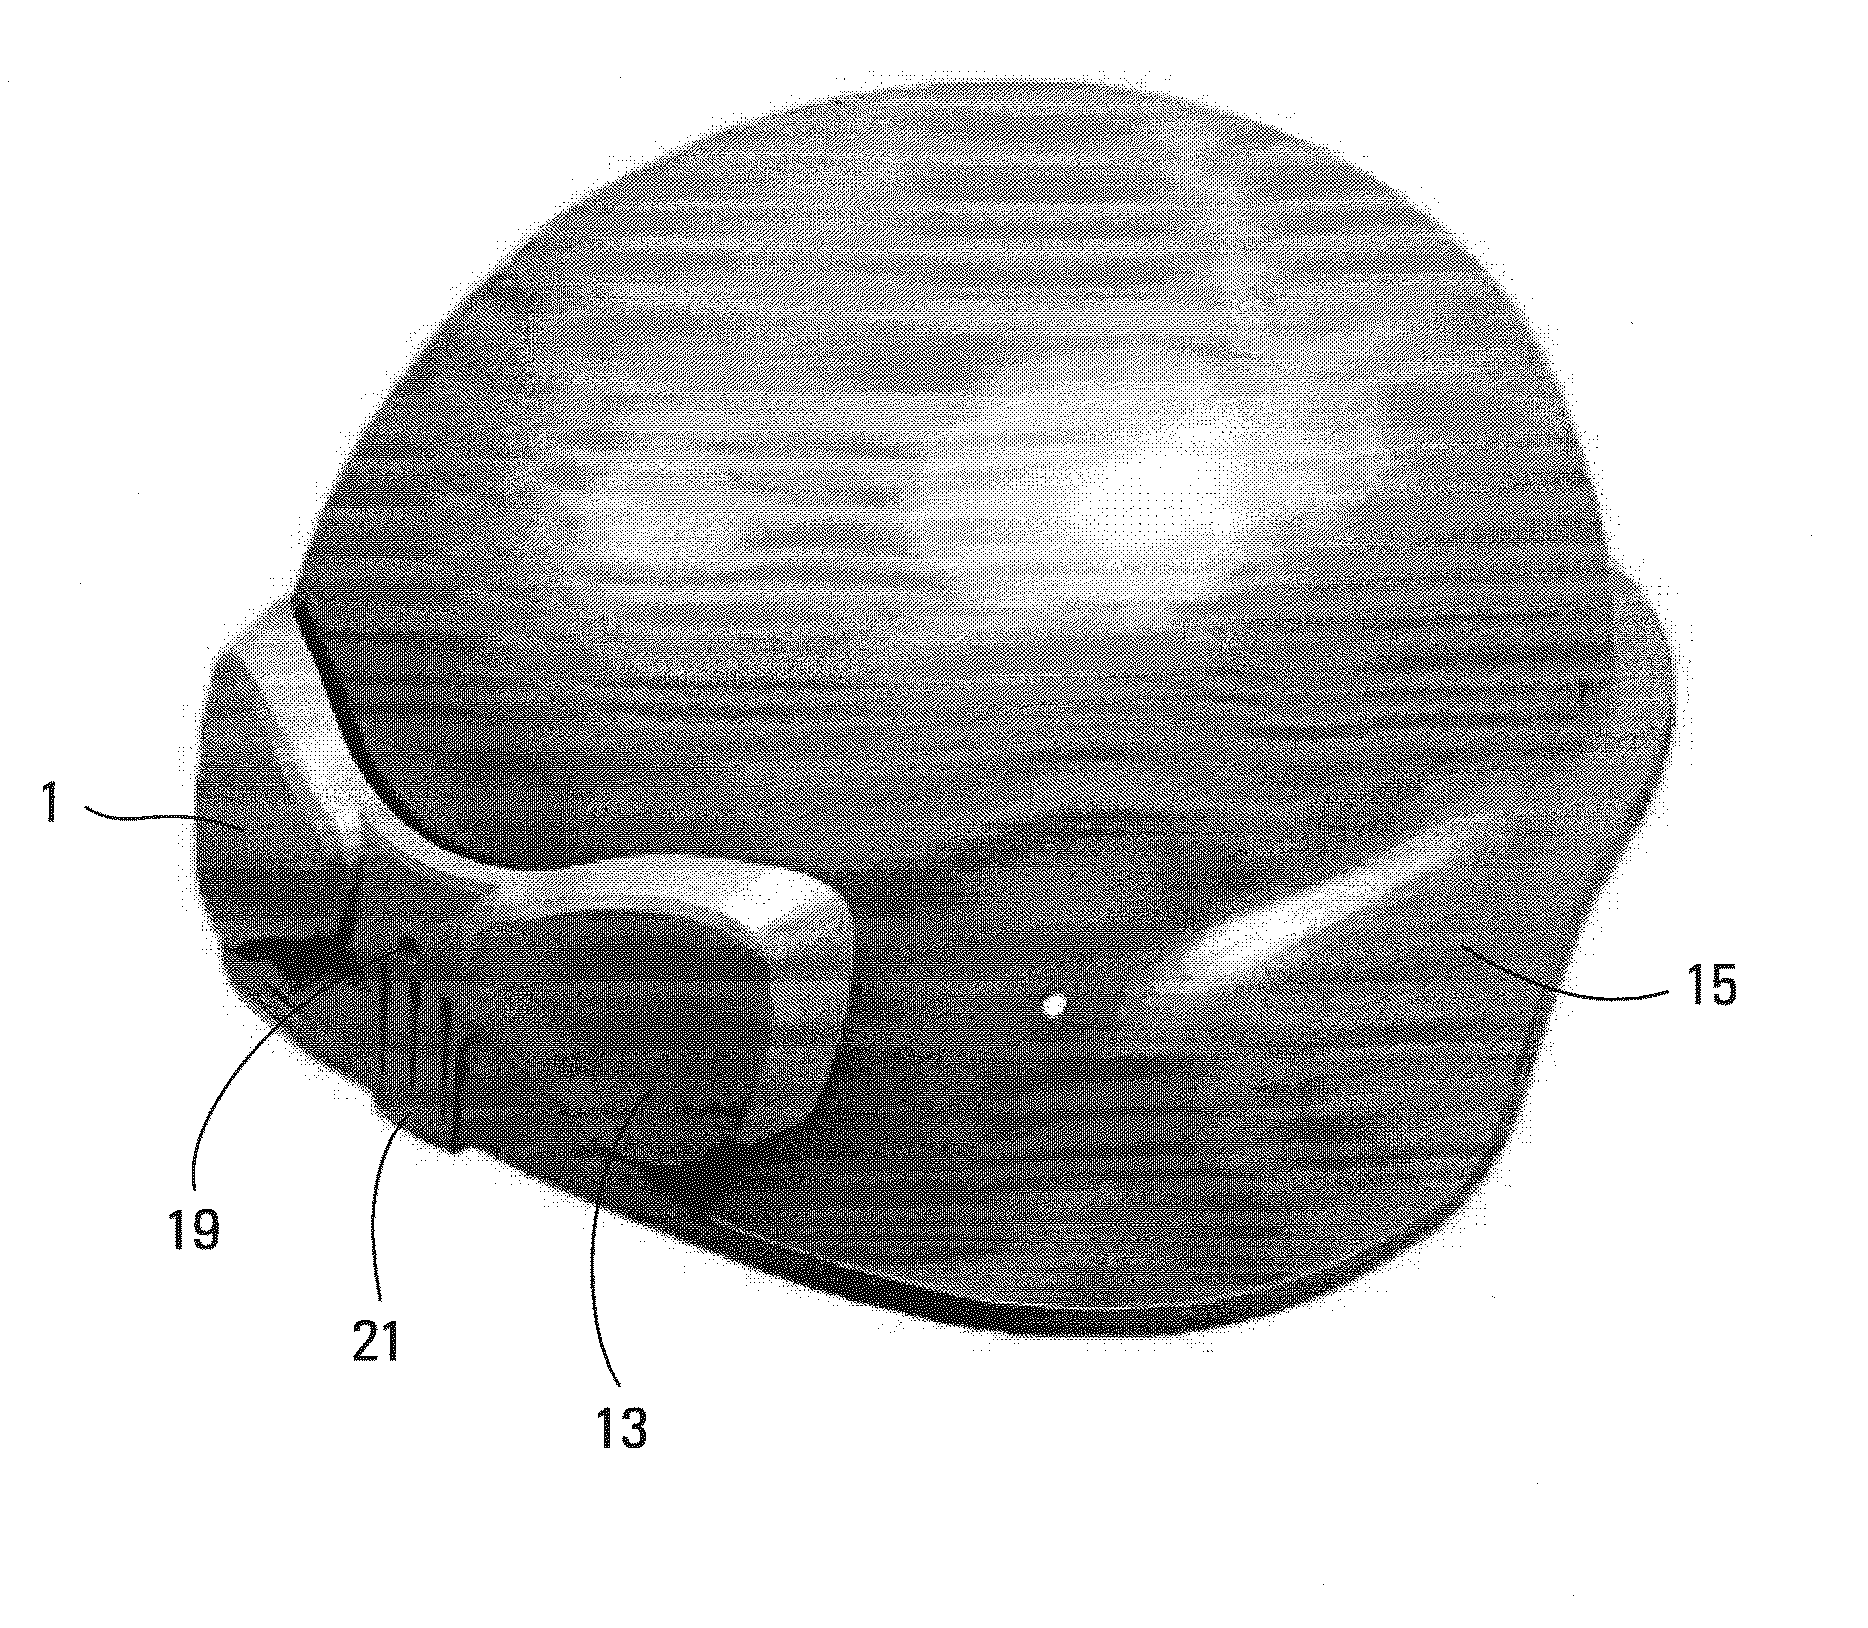 Apparatus for Measuring Data for Injury Analysis with Power Management